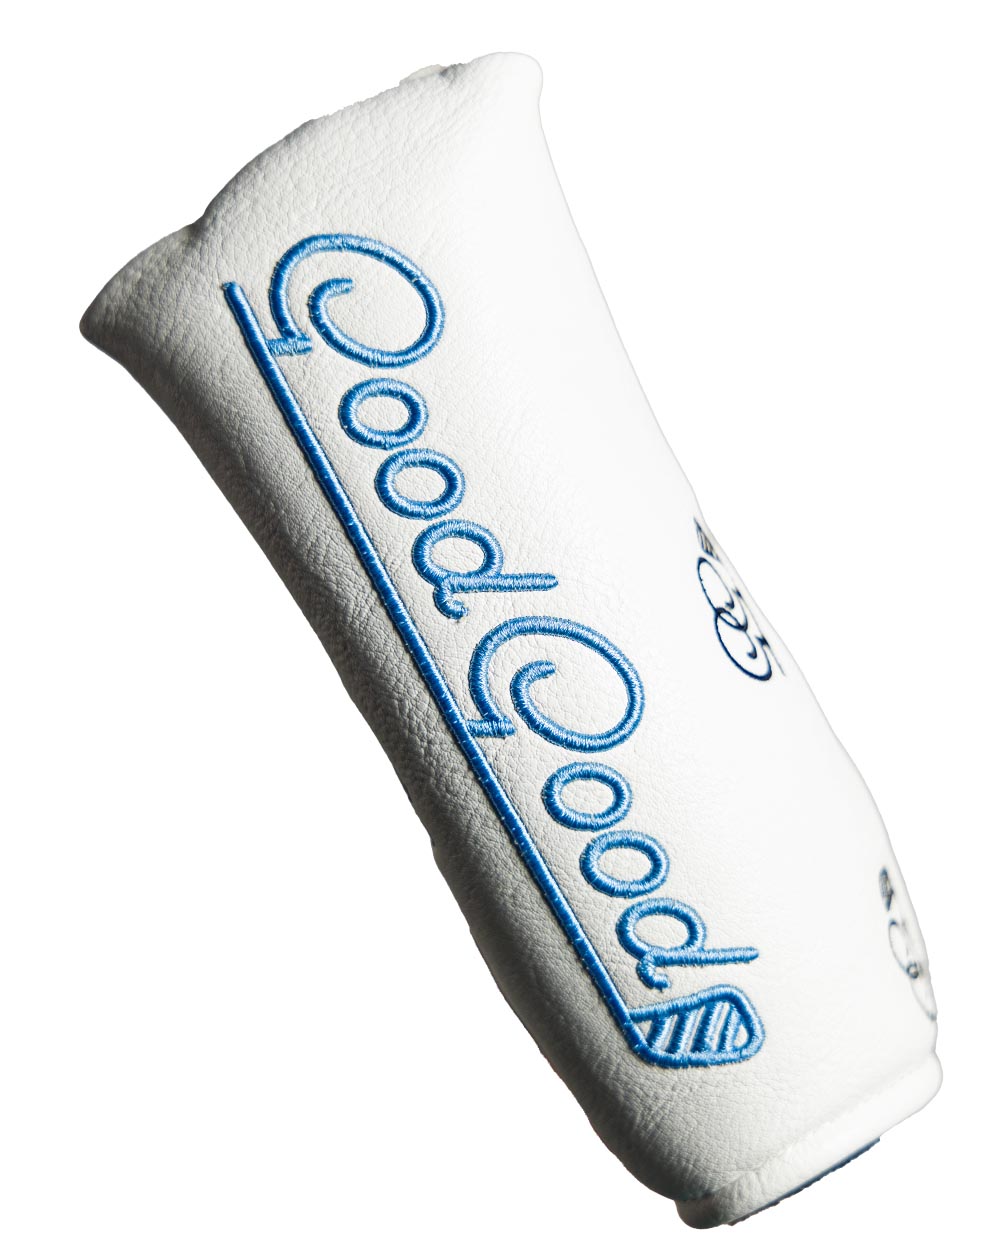 goodgood_superstroke-blackout-putter_cover_pdp-2.jpg__PID:07a0f3c0-3963-4146-abc9-8e78a62738d0